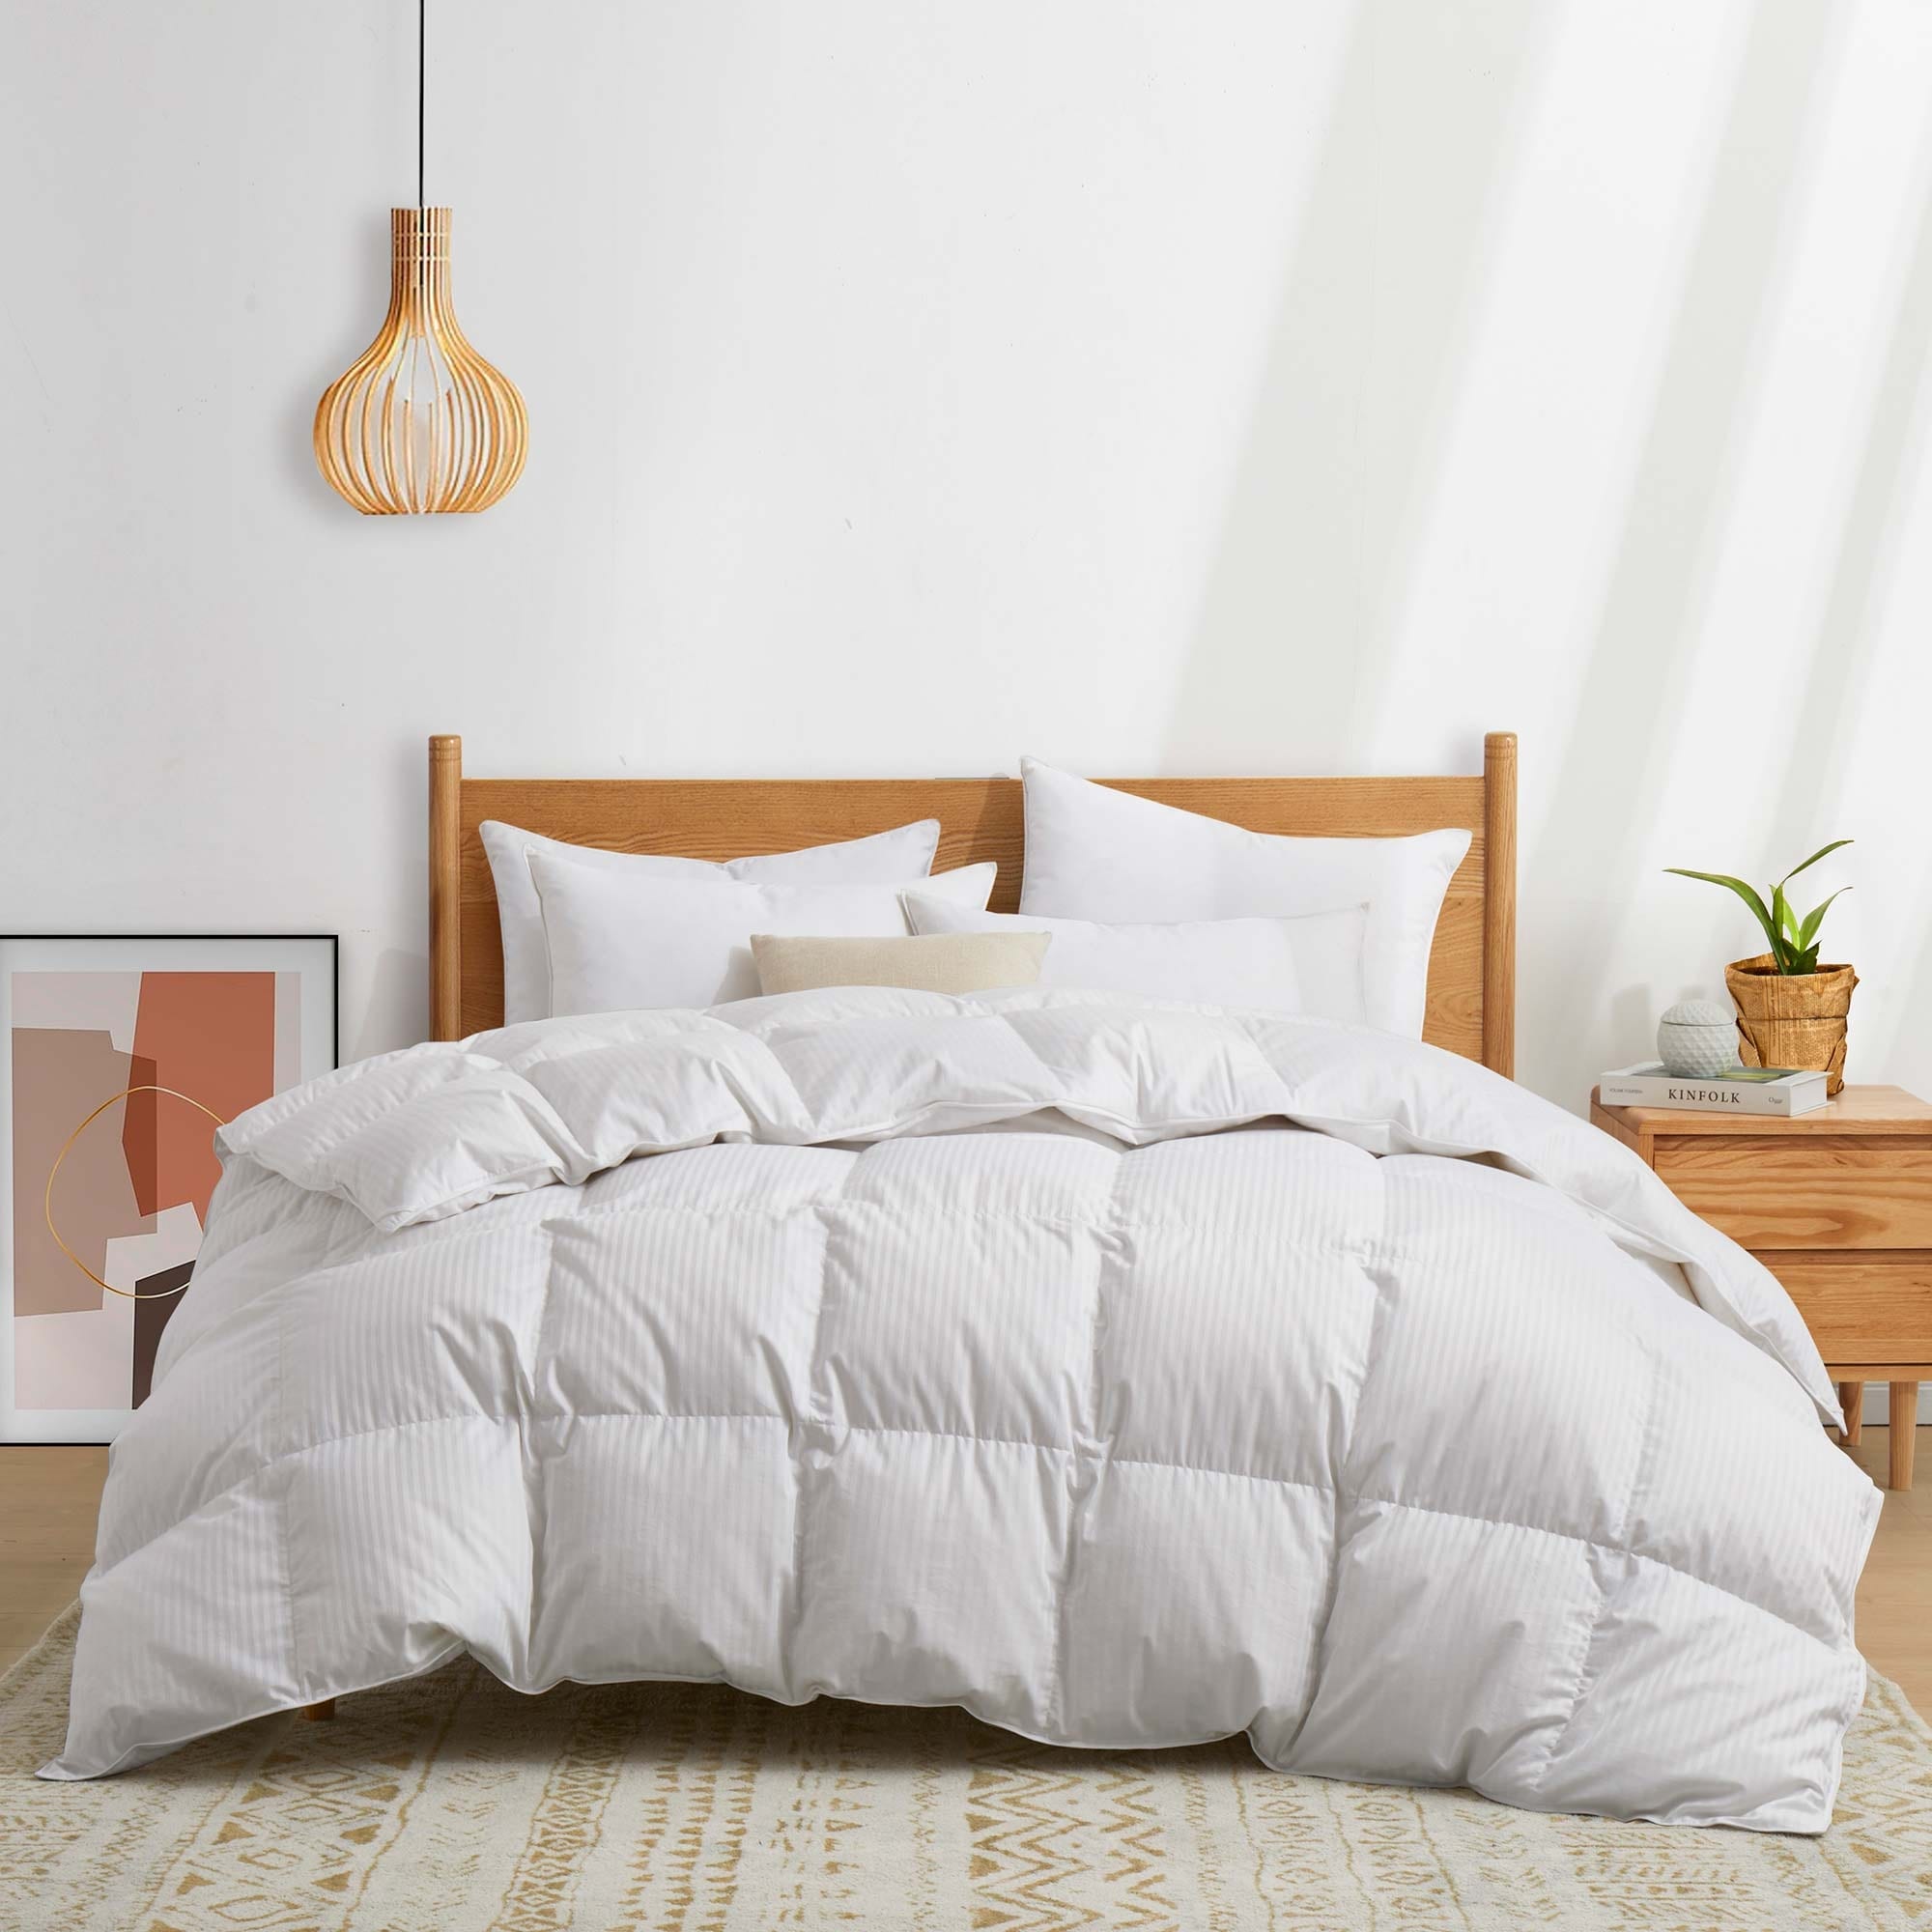 https://ak1.ostkcdn.com/images/products/is/images/direct/cbe4089d24e53939d2add4afcc6d97f3d50737ff/Luxury-European-White-Down-Comforter-800-Fill-Power-Made-in-Germany.jpg